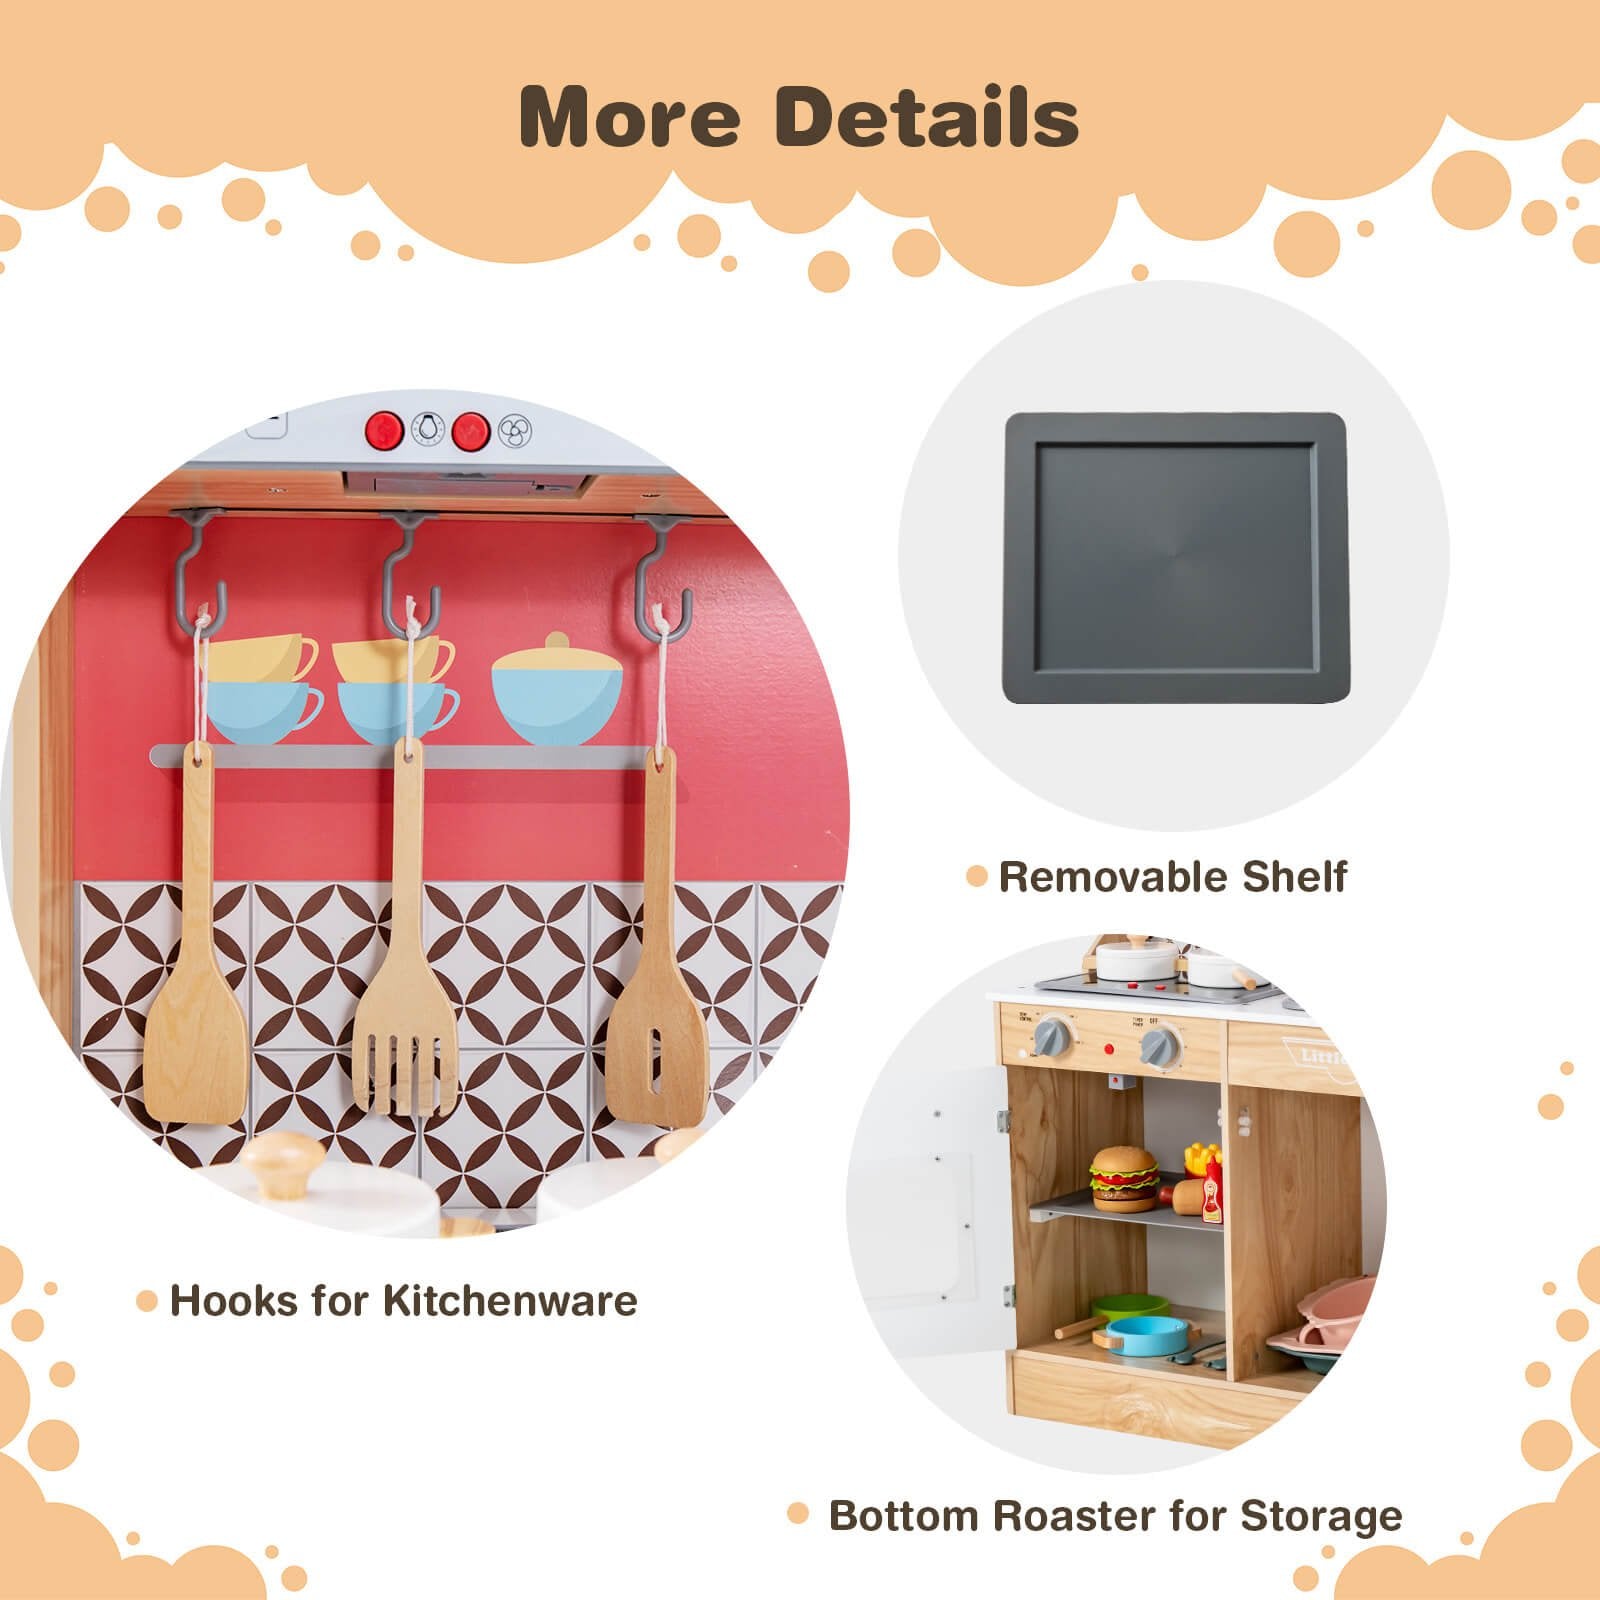 Multi-Functional Wooden Kids Kitchen Playset with Lights and Sounds, Multicolor at Gallery Canada